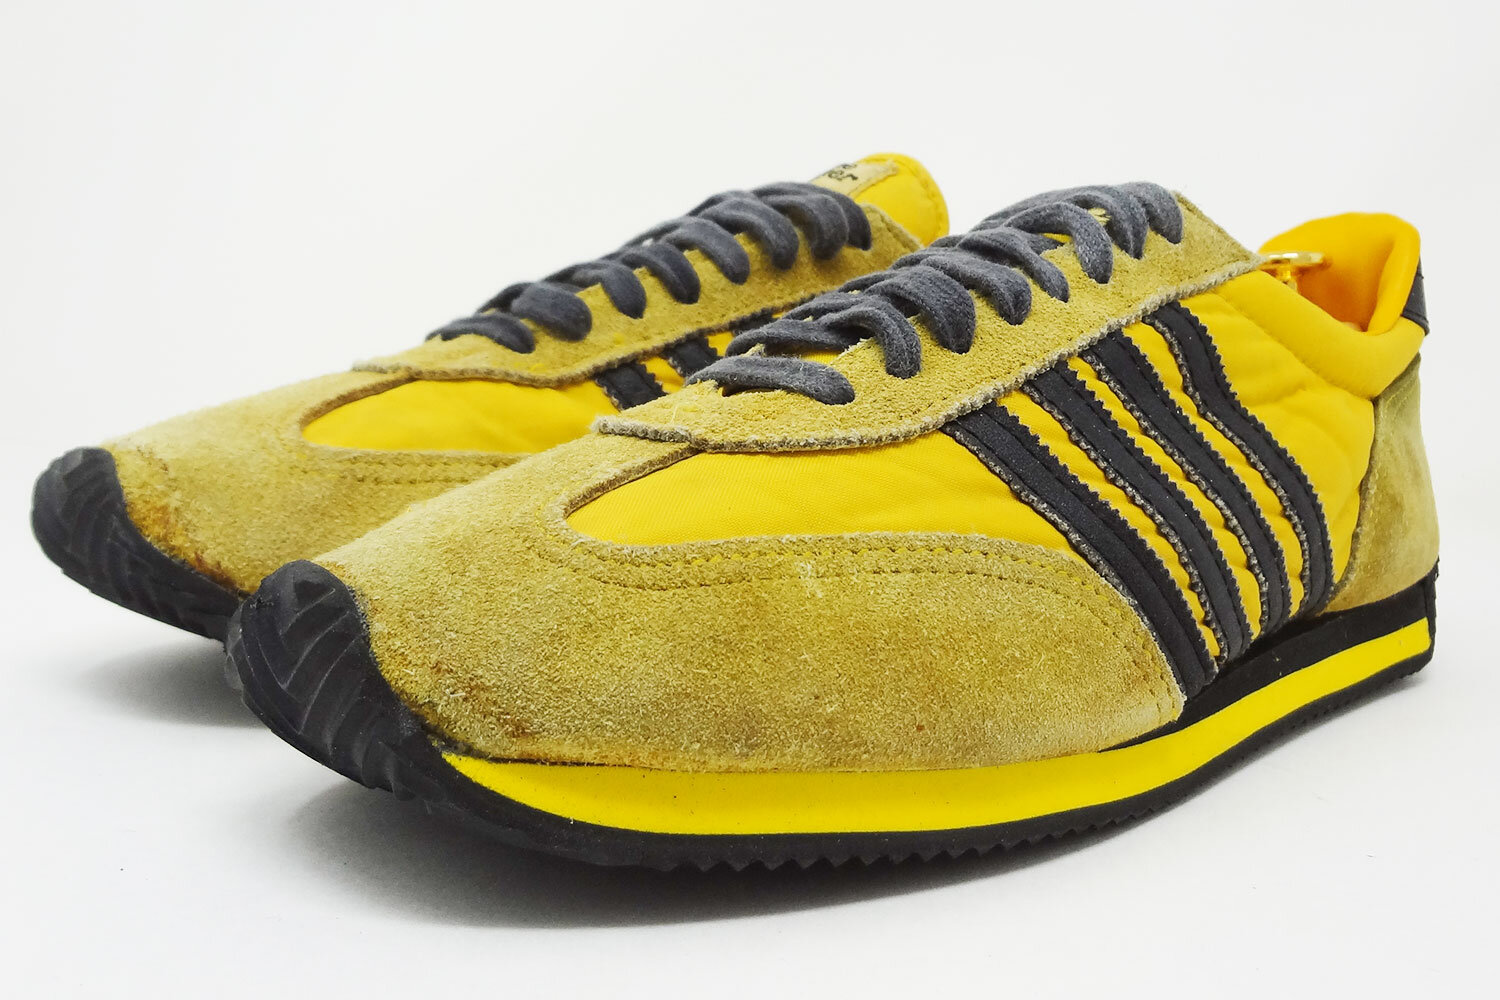 Sears The Winner yellow and black vintage running shoes @ The Deffest